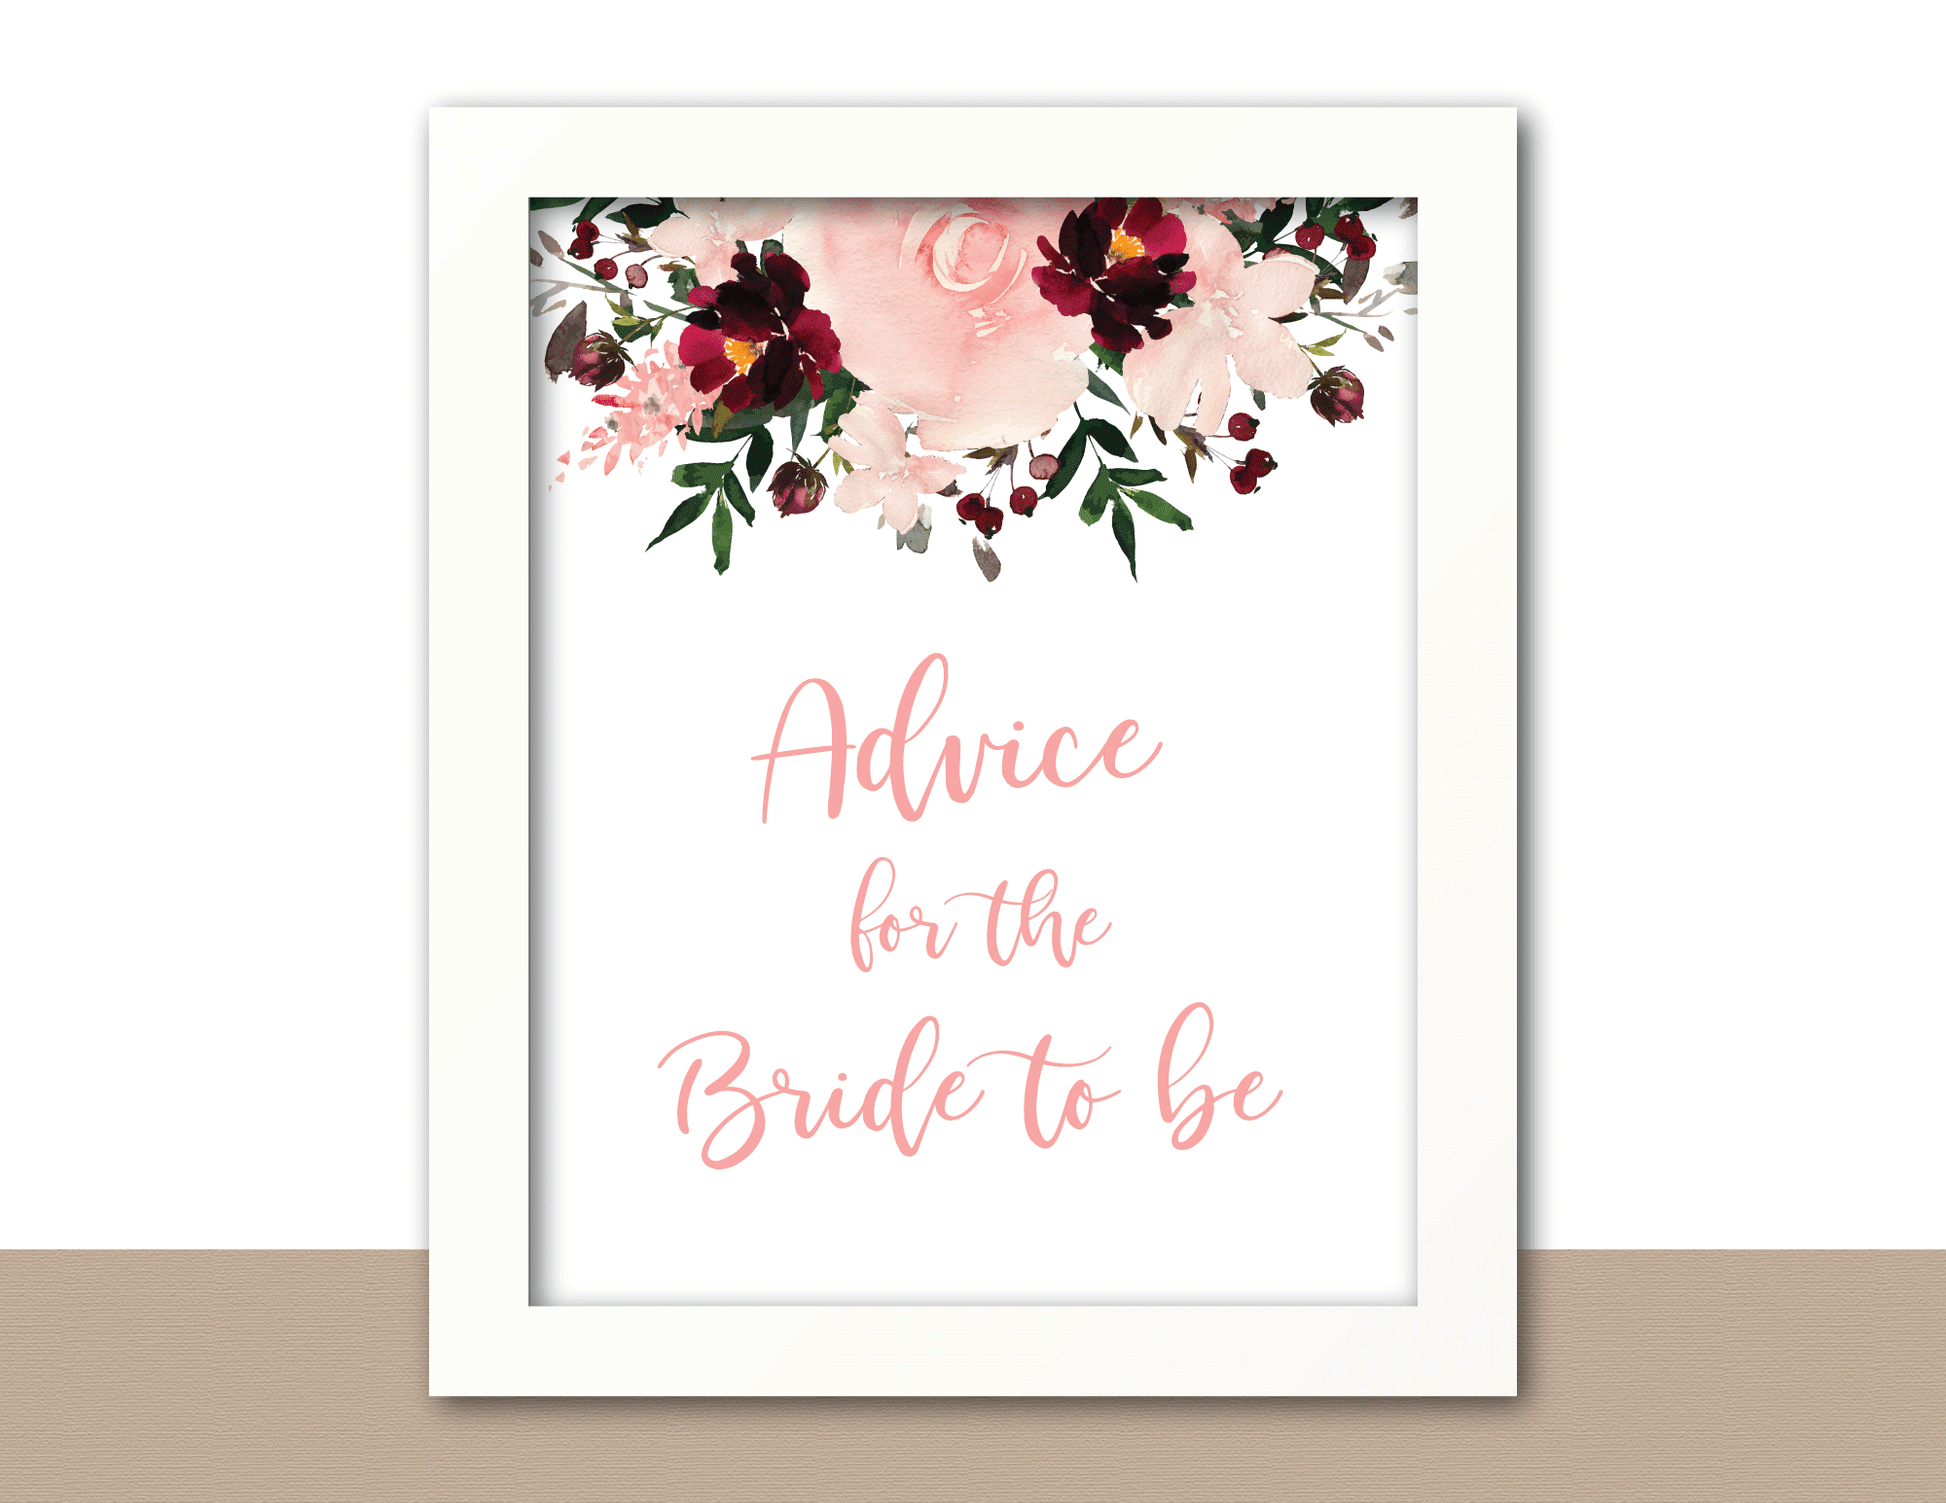 advice for the bride to be sign - printable bridal shower decor - Celebrating Together